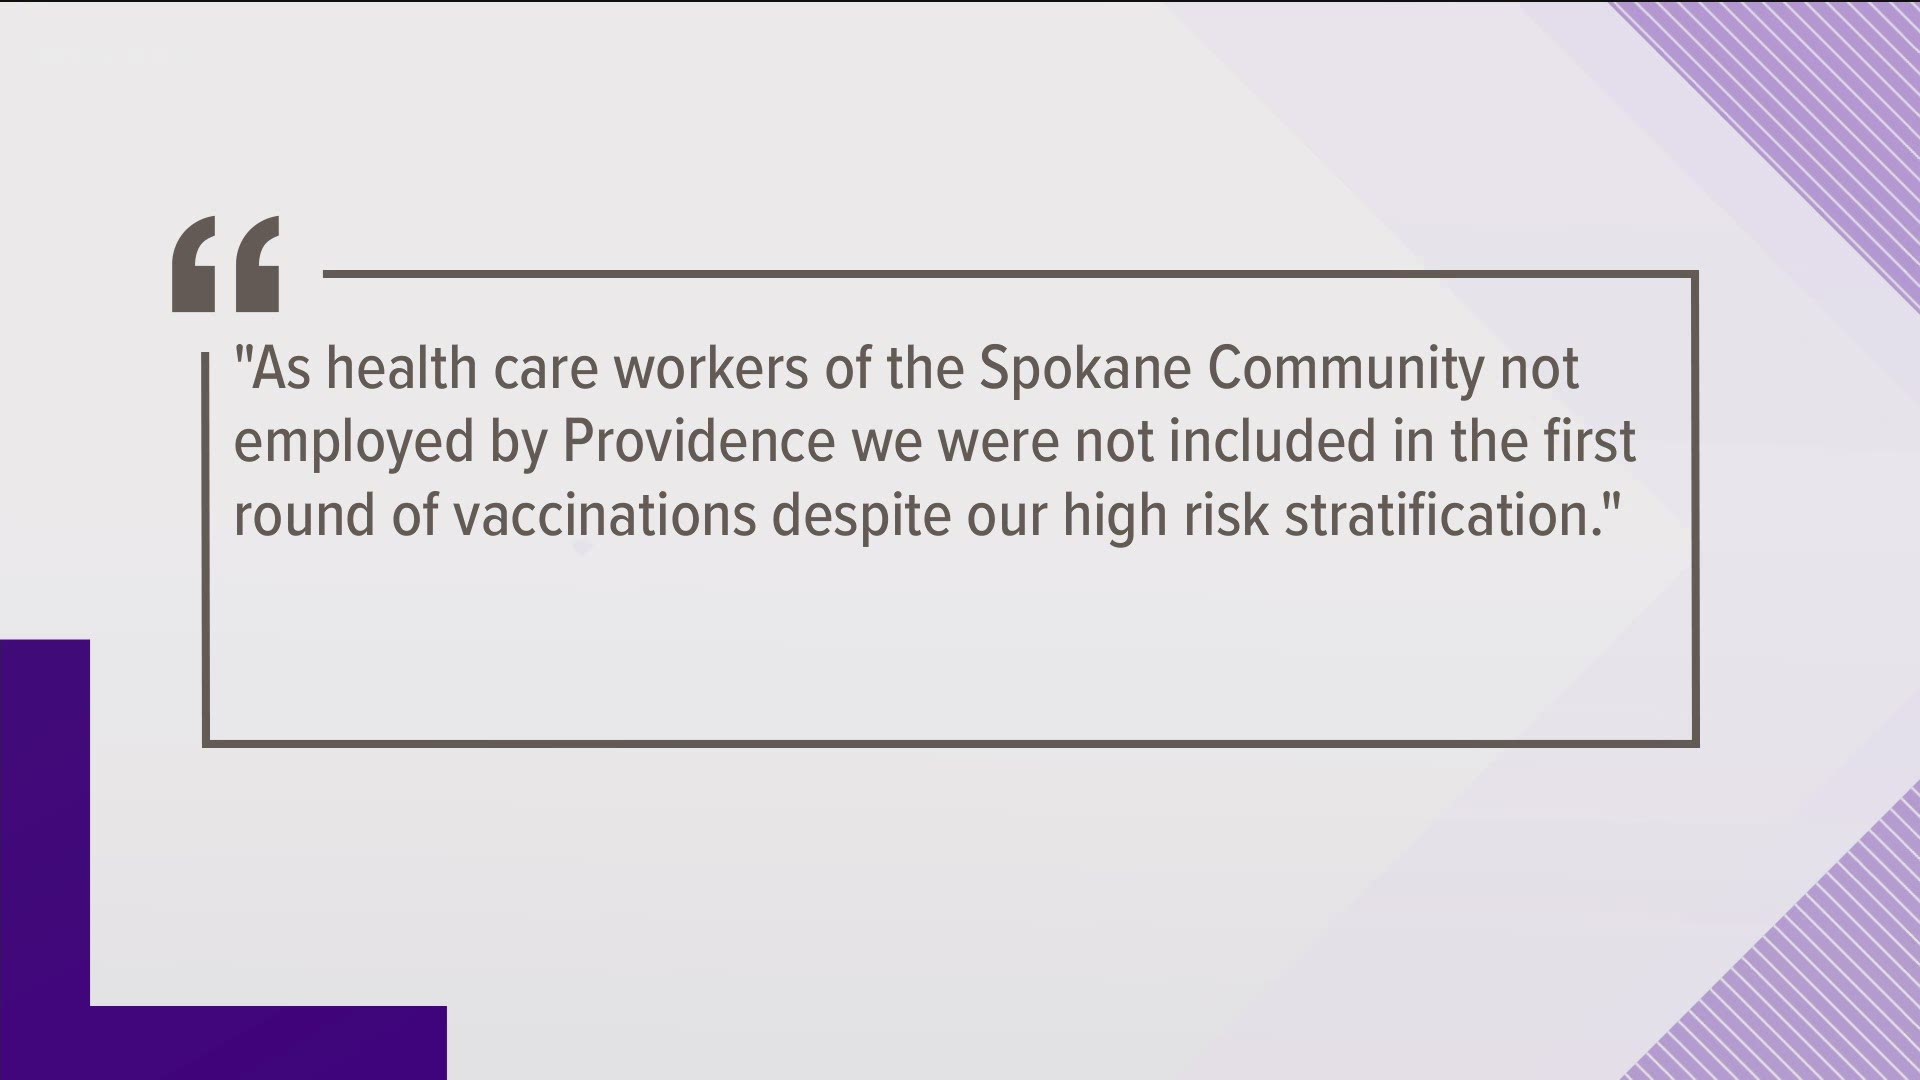 A group of physicians reached out to KREM 2 saying they were concerned about how the vaccine was being distributed.